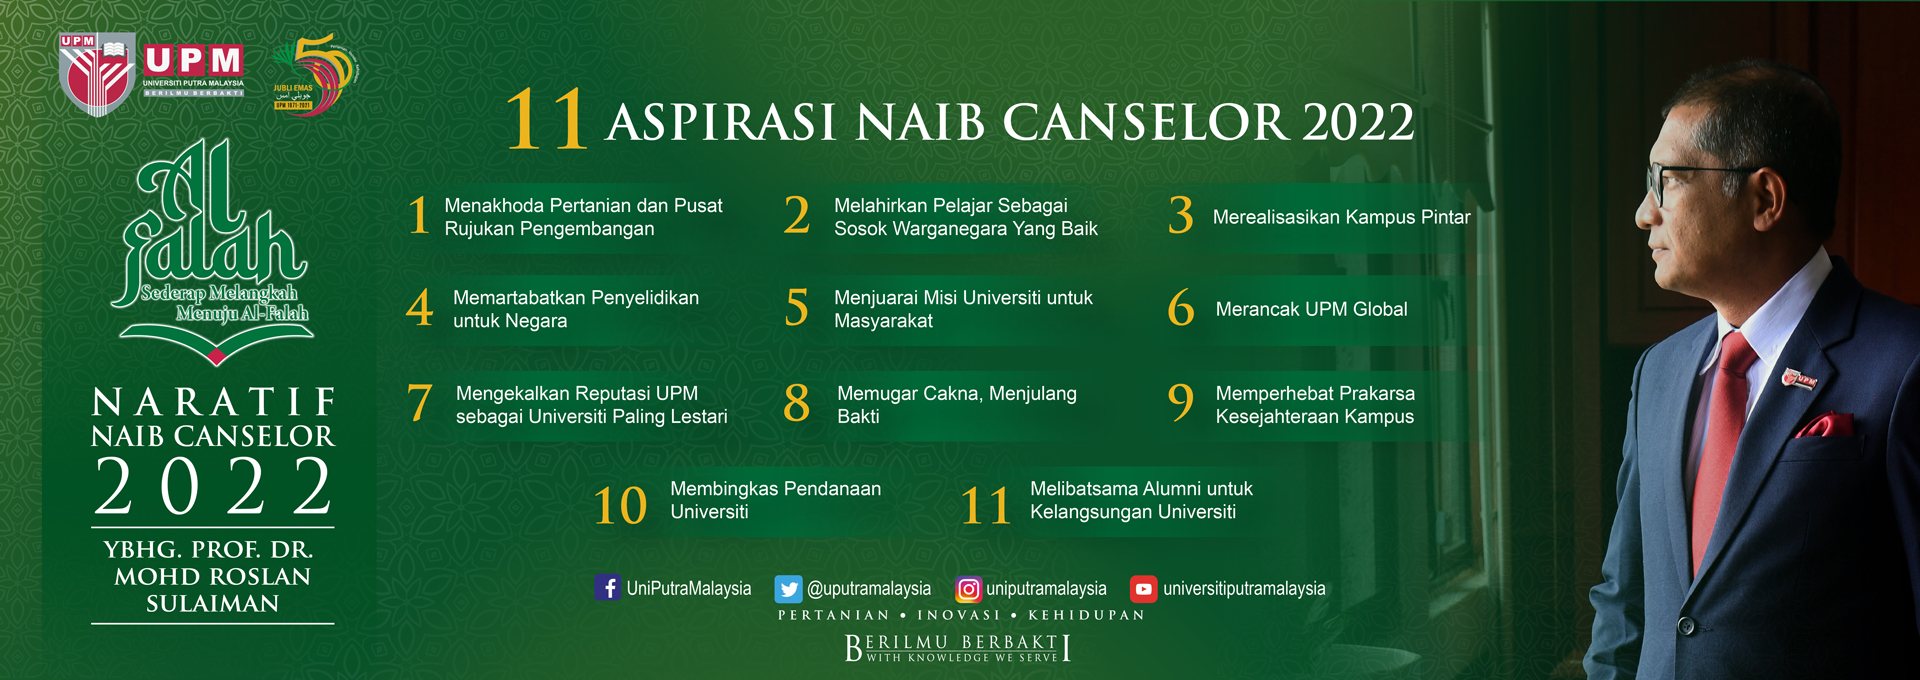 11 Aspiration of Vice Canselor UPM